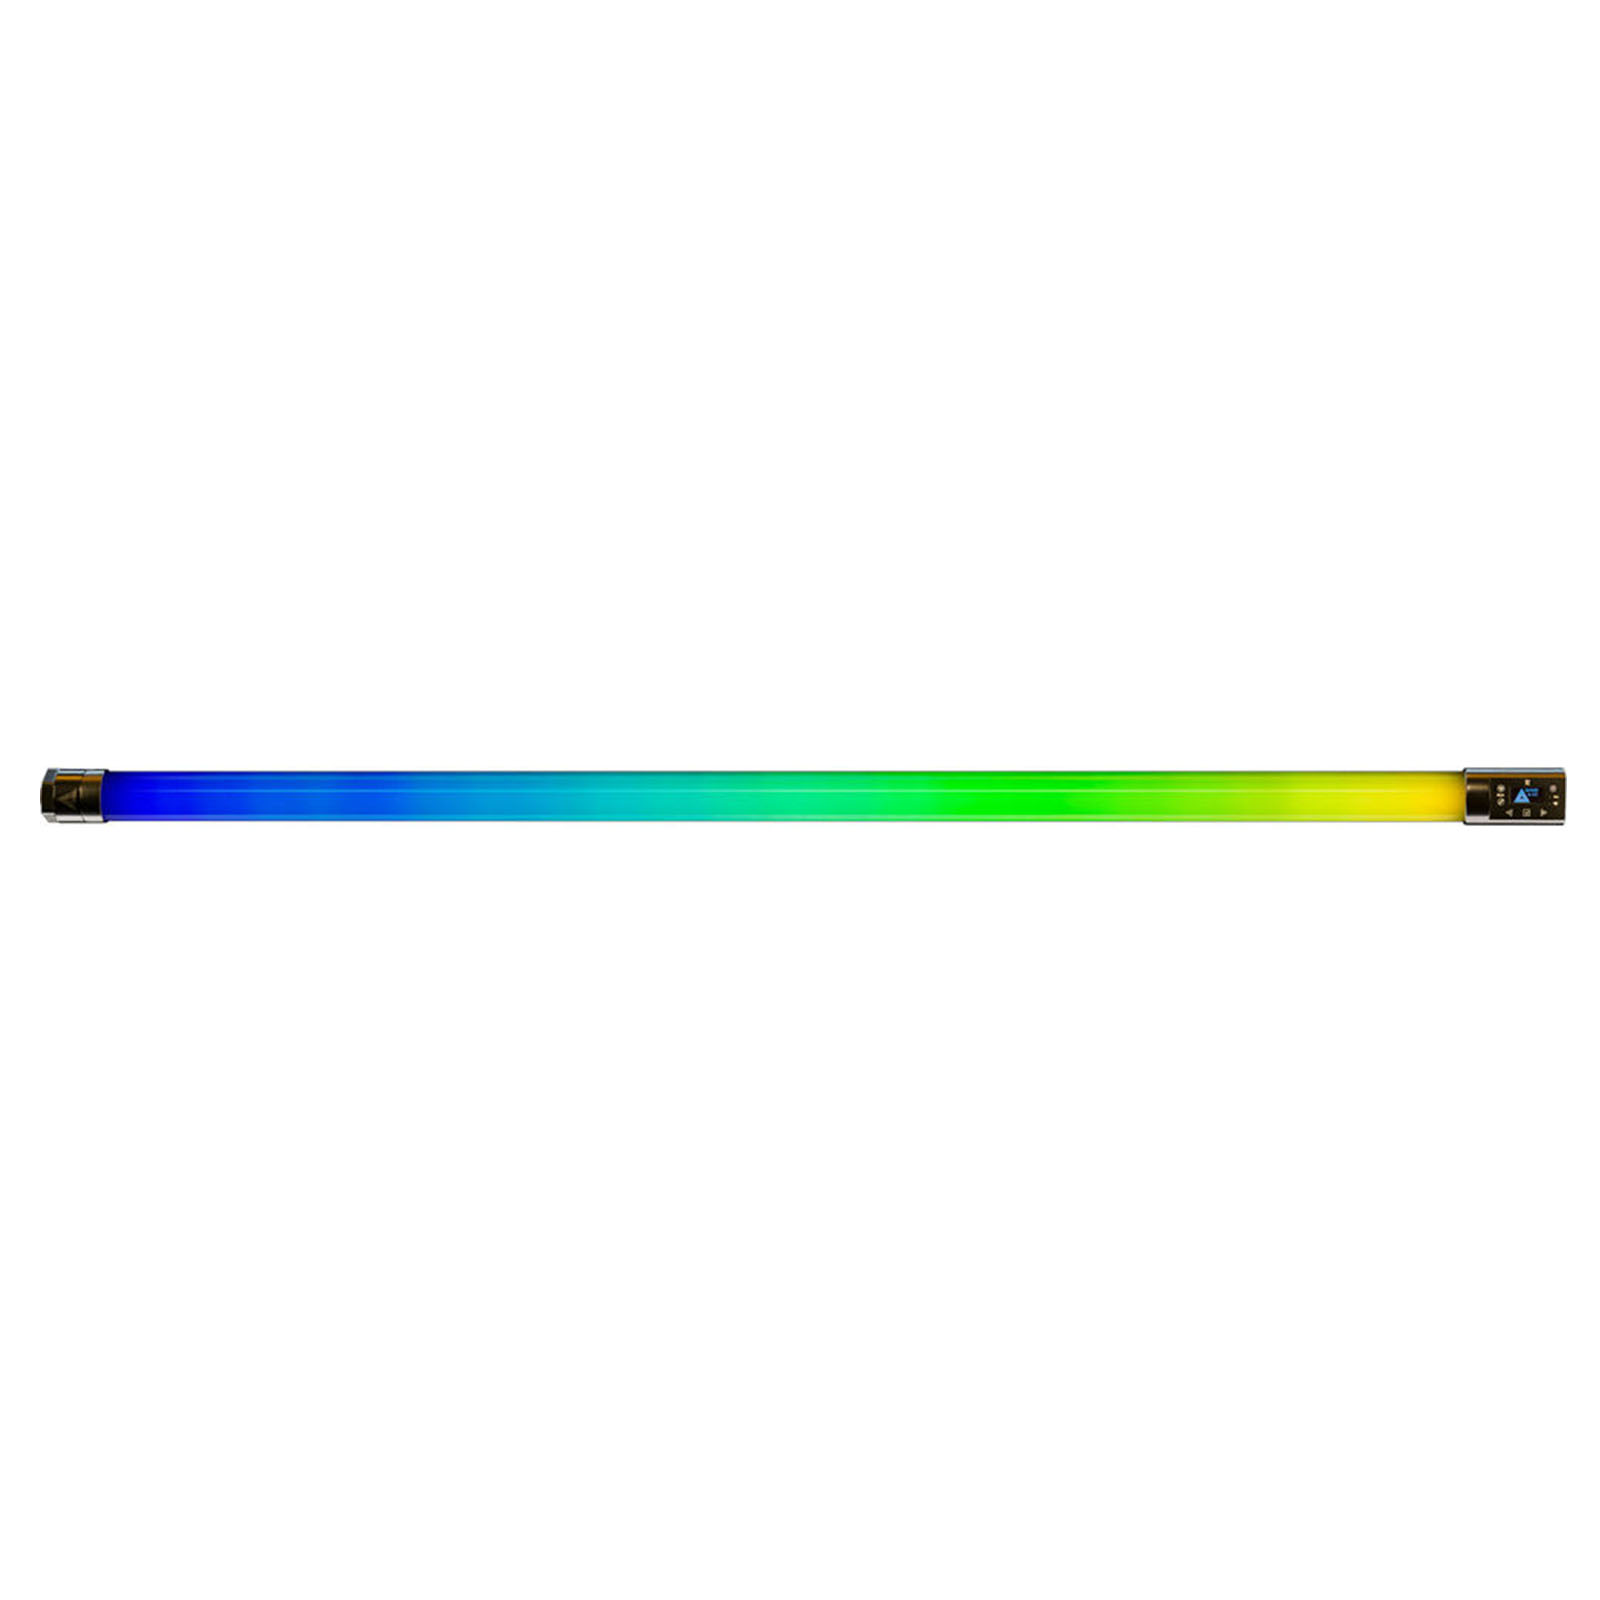 Image of Quasar Science Rainbow2 50W linear LED light with multipixel RGBX color system